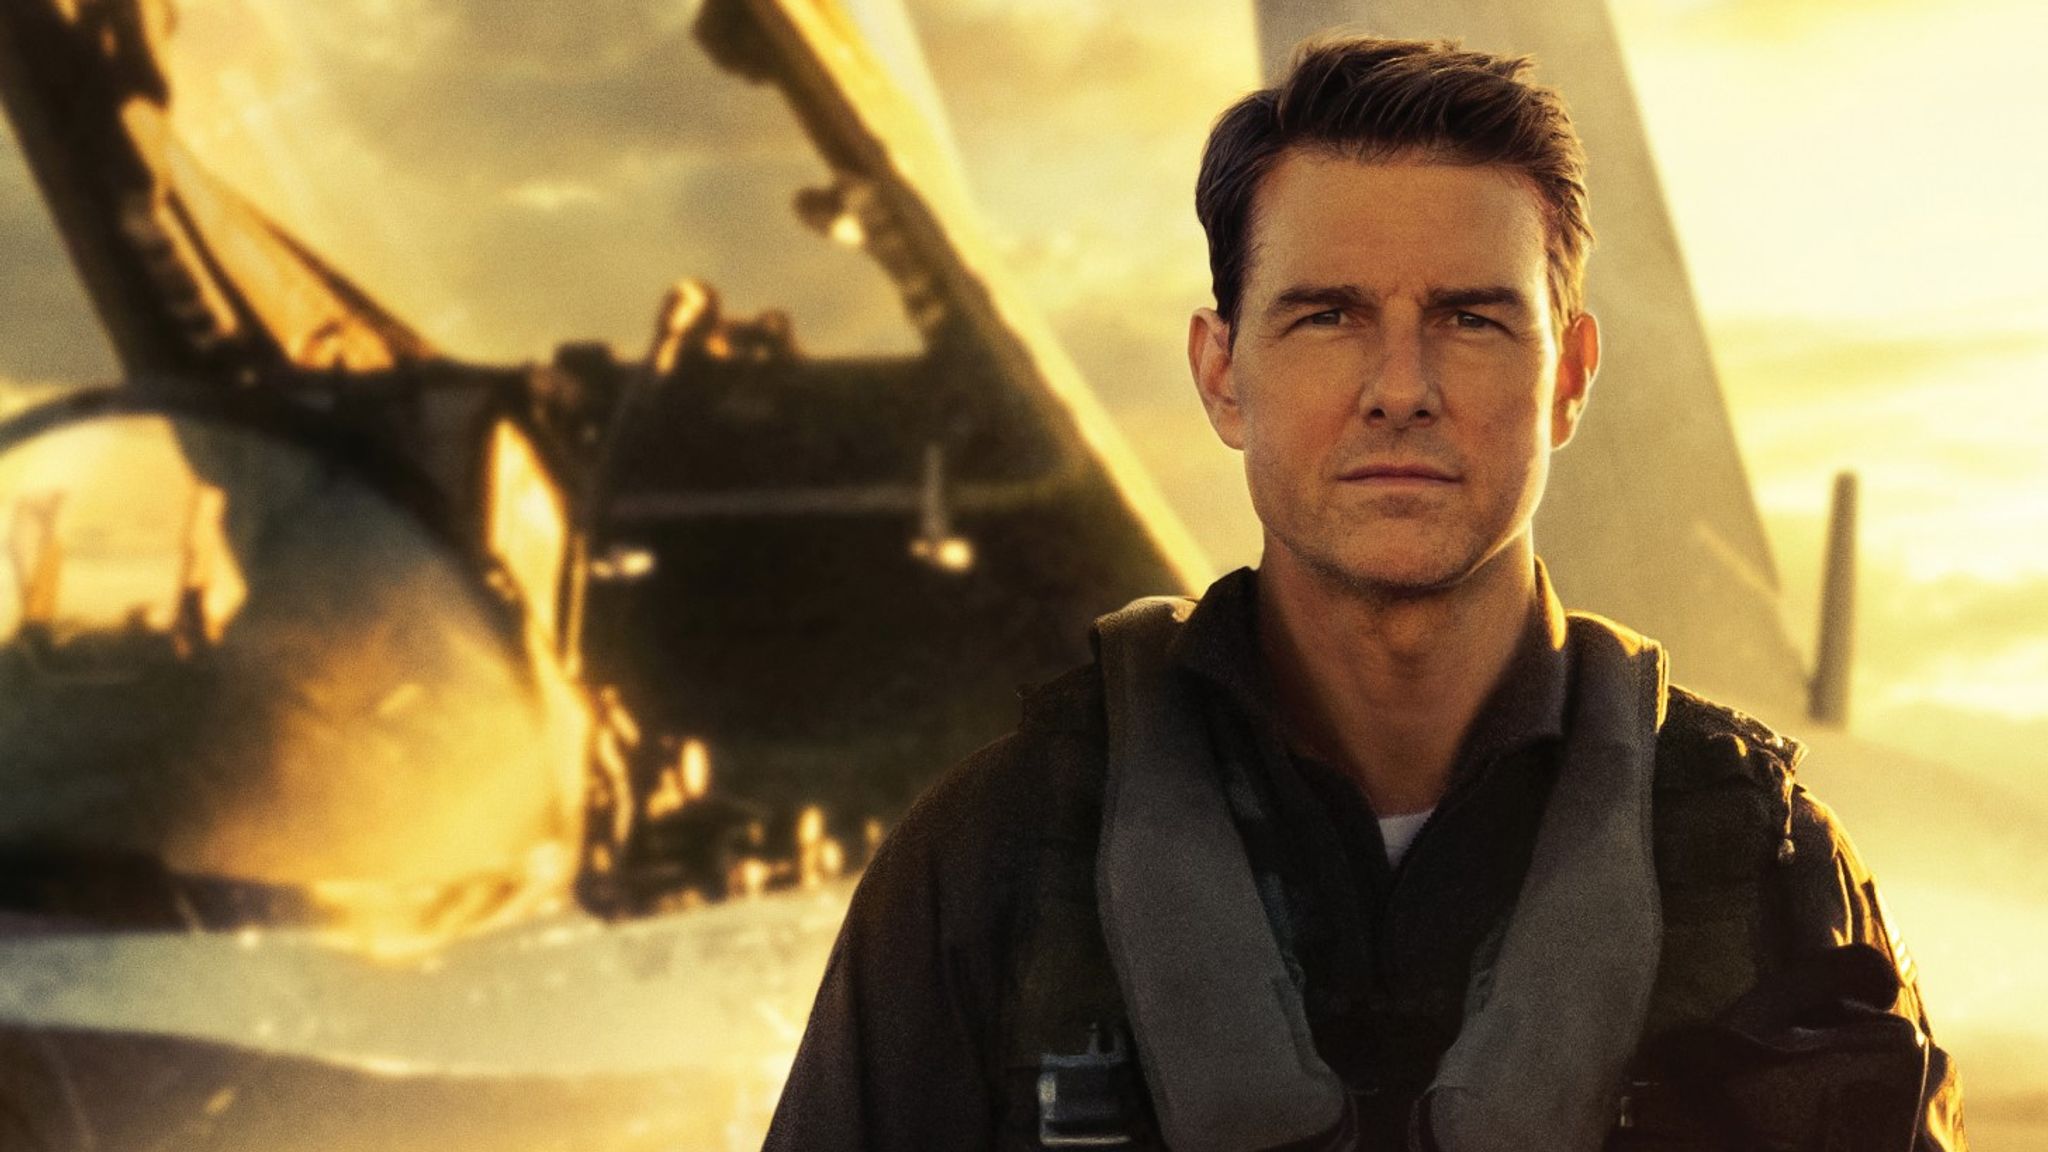 Top Gun: Maverick Is Holding Strong With Massive $86 Million Second Weekend  Box Office [Update]